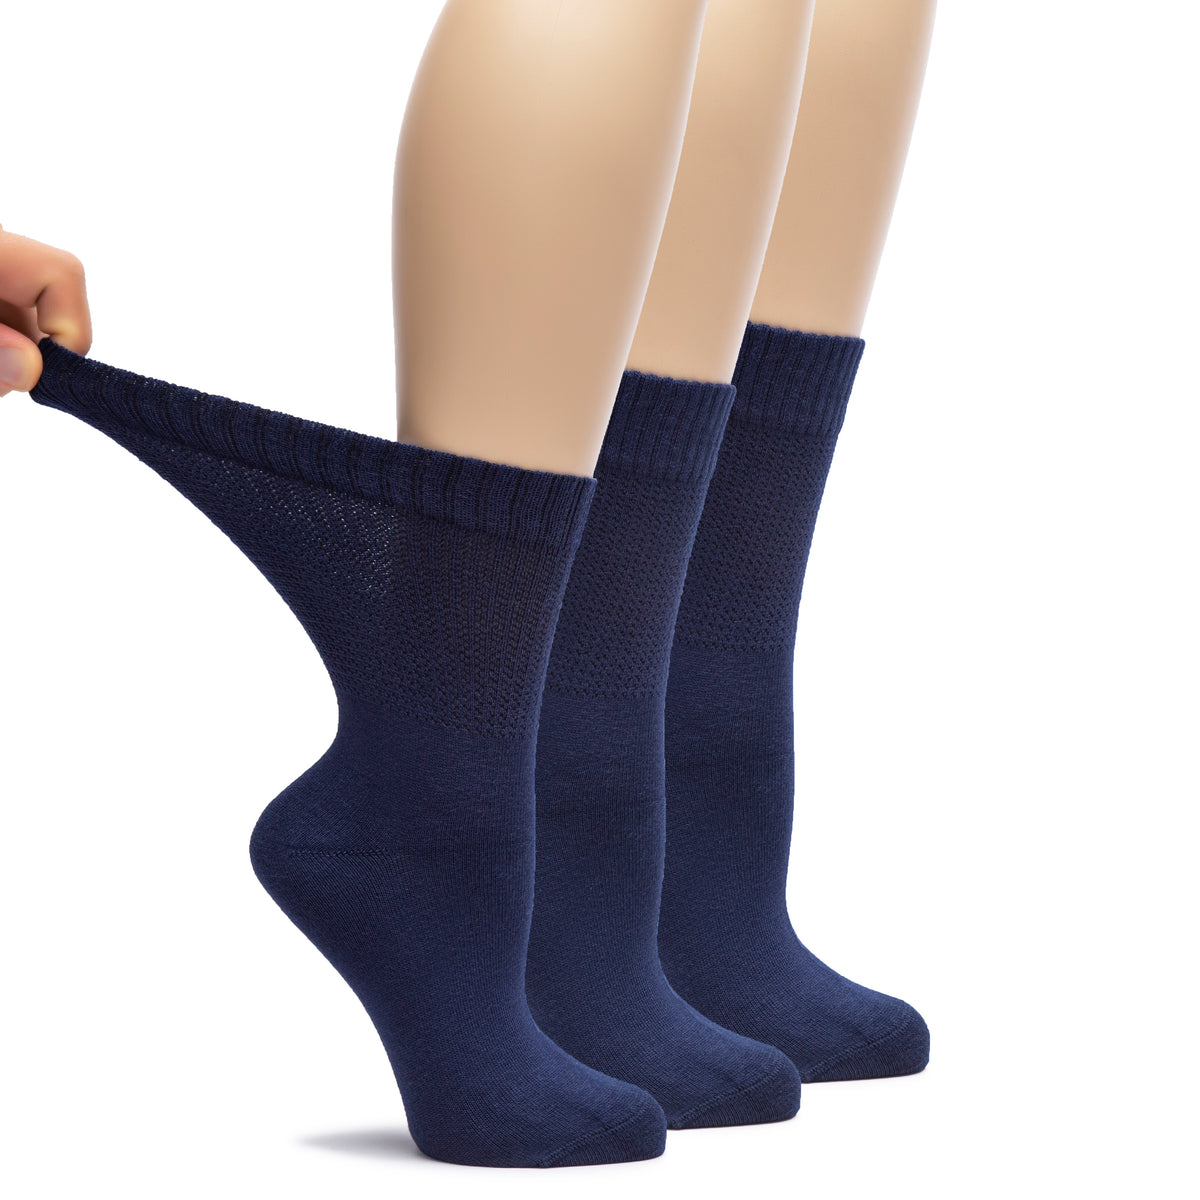 A trio of women's Bamboo Diabetic Crew Socks, each with one leg lifted, showcasing their soft and comfortable texture.